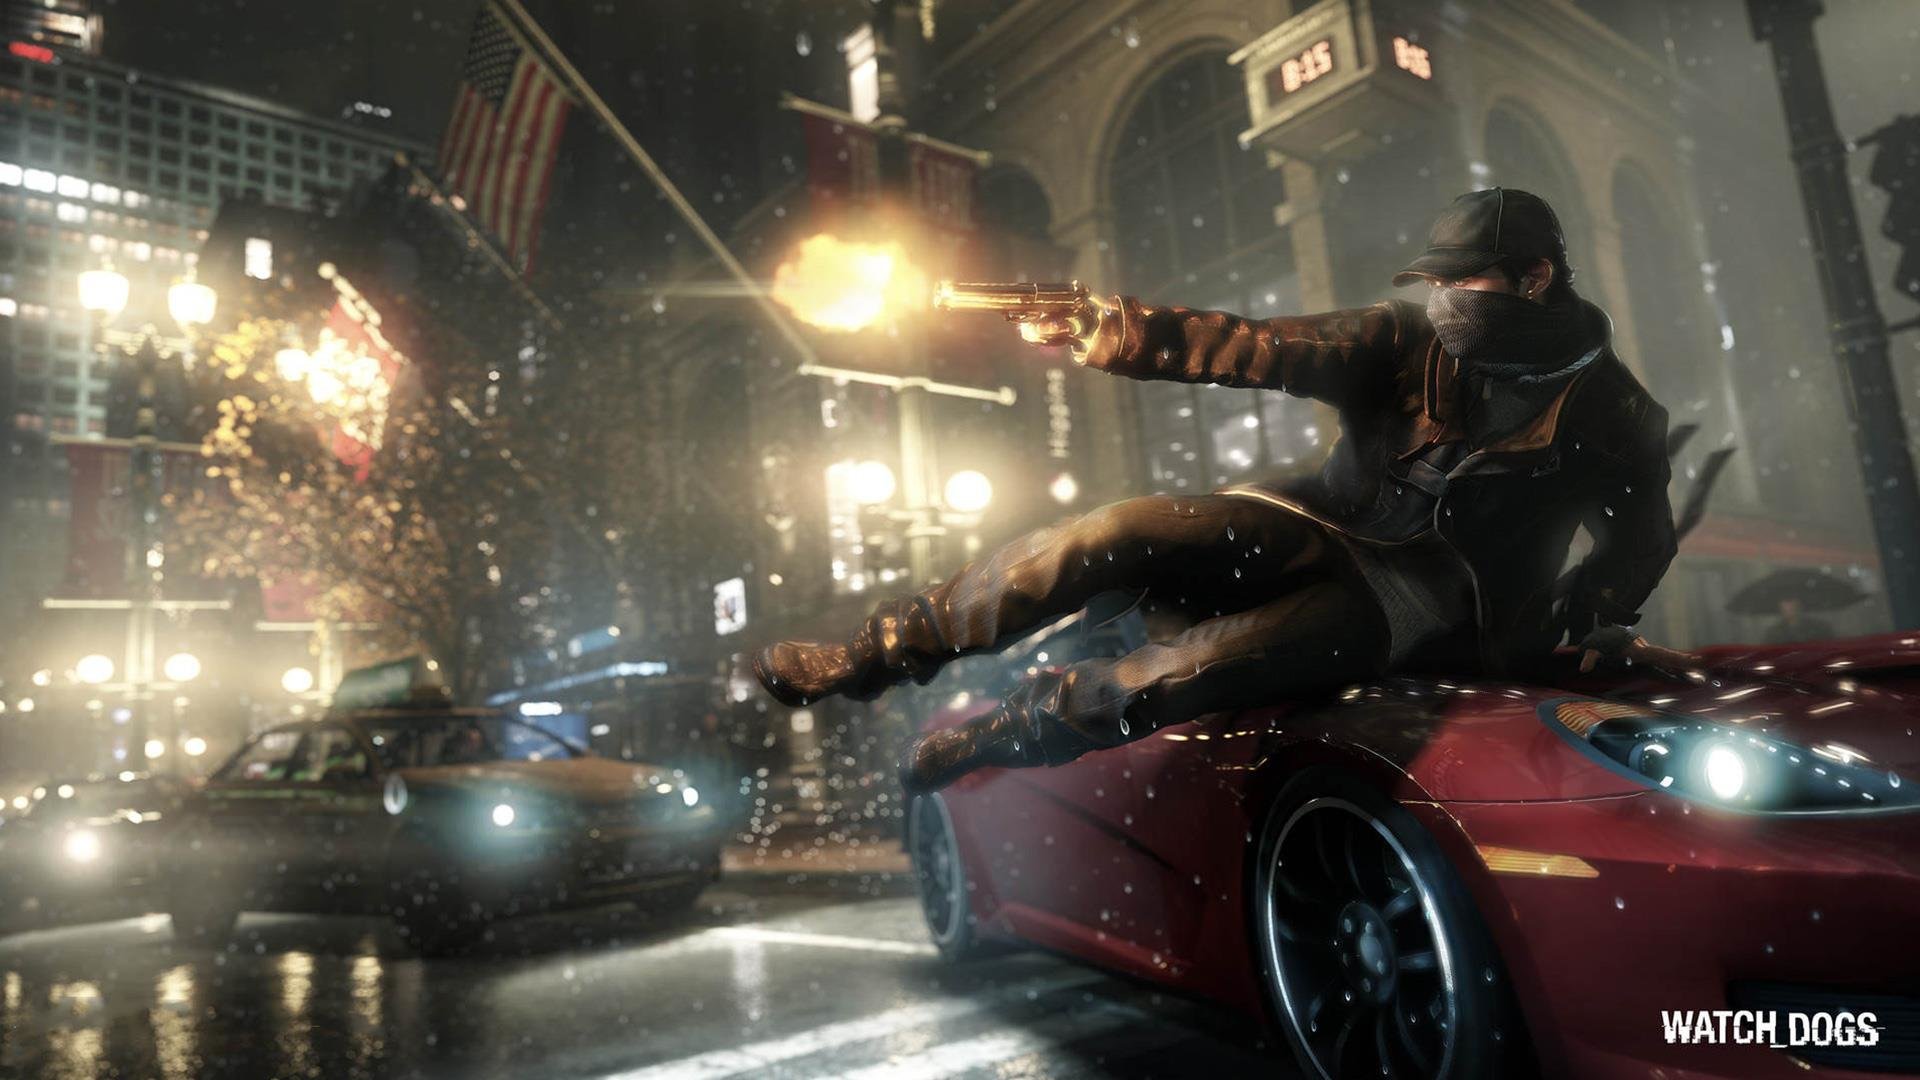 Best Watch Dogs wallpaper ID:117249 for High Resolution full hd 1920x1080 PC